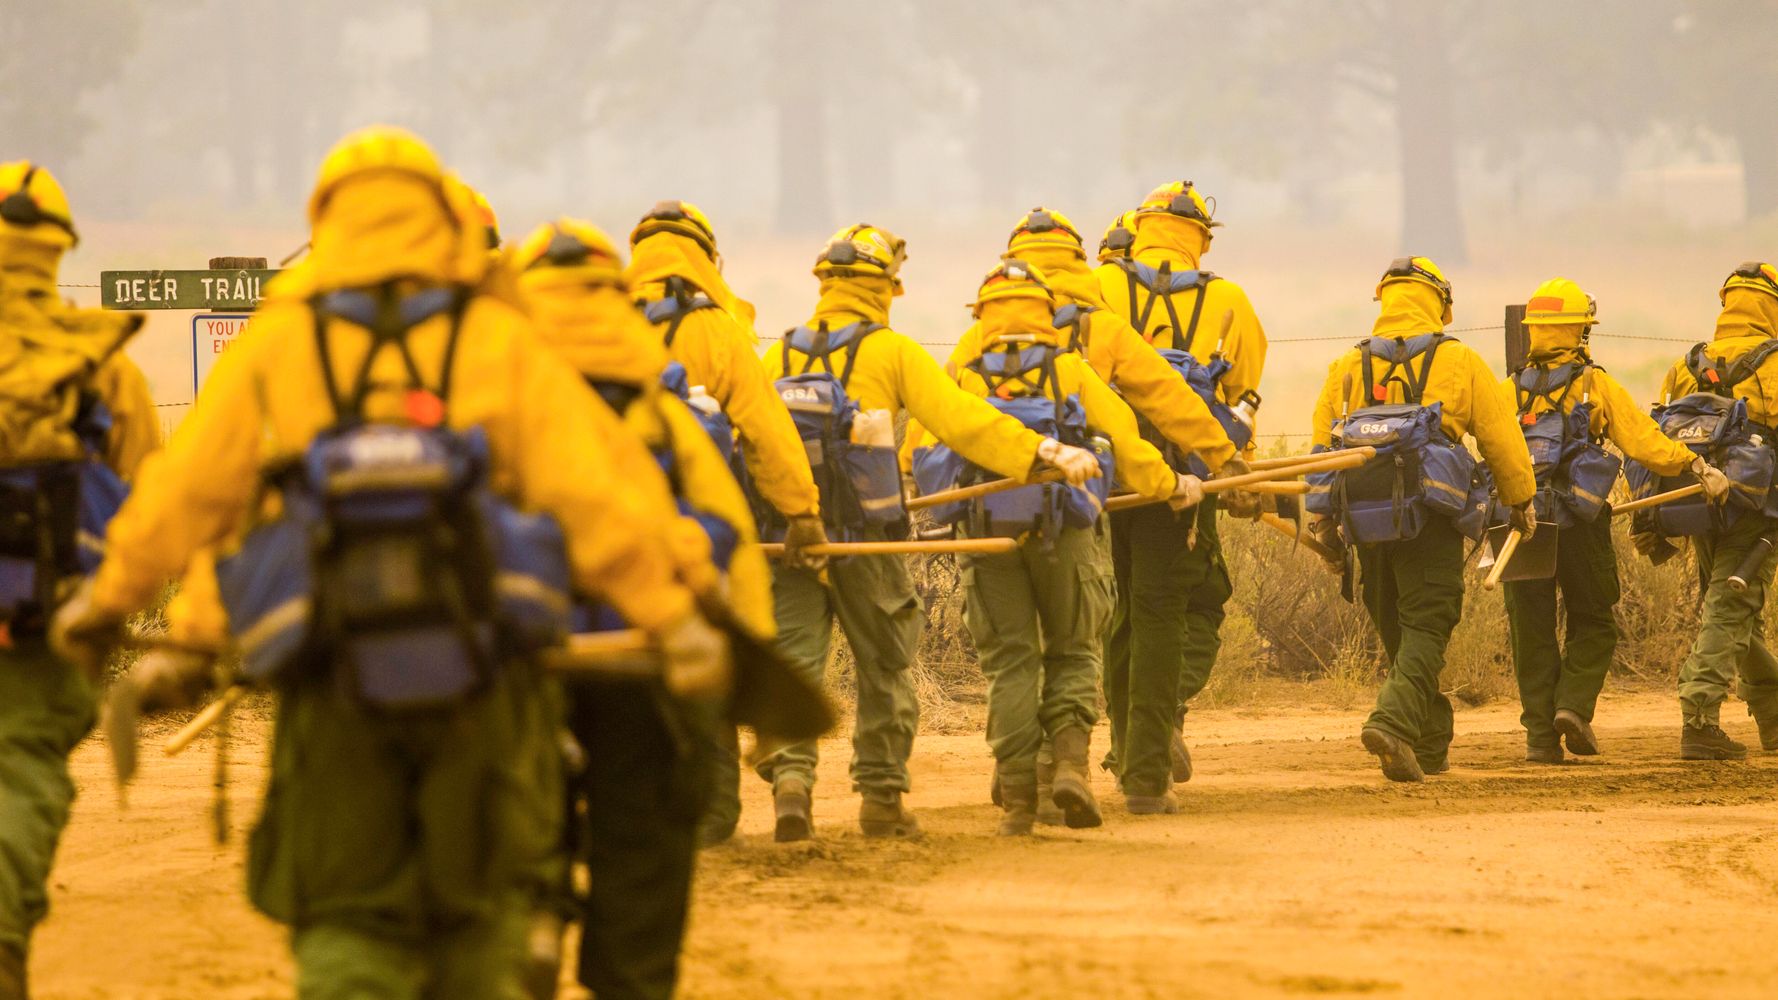 More Than 13,500 Firefighters Battle To Contain A Dozen Large Wildfires In California